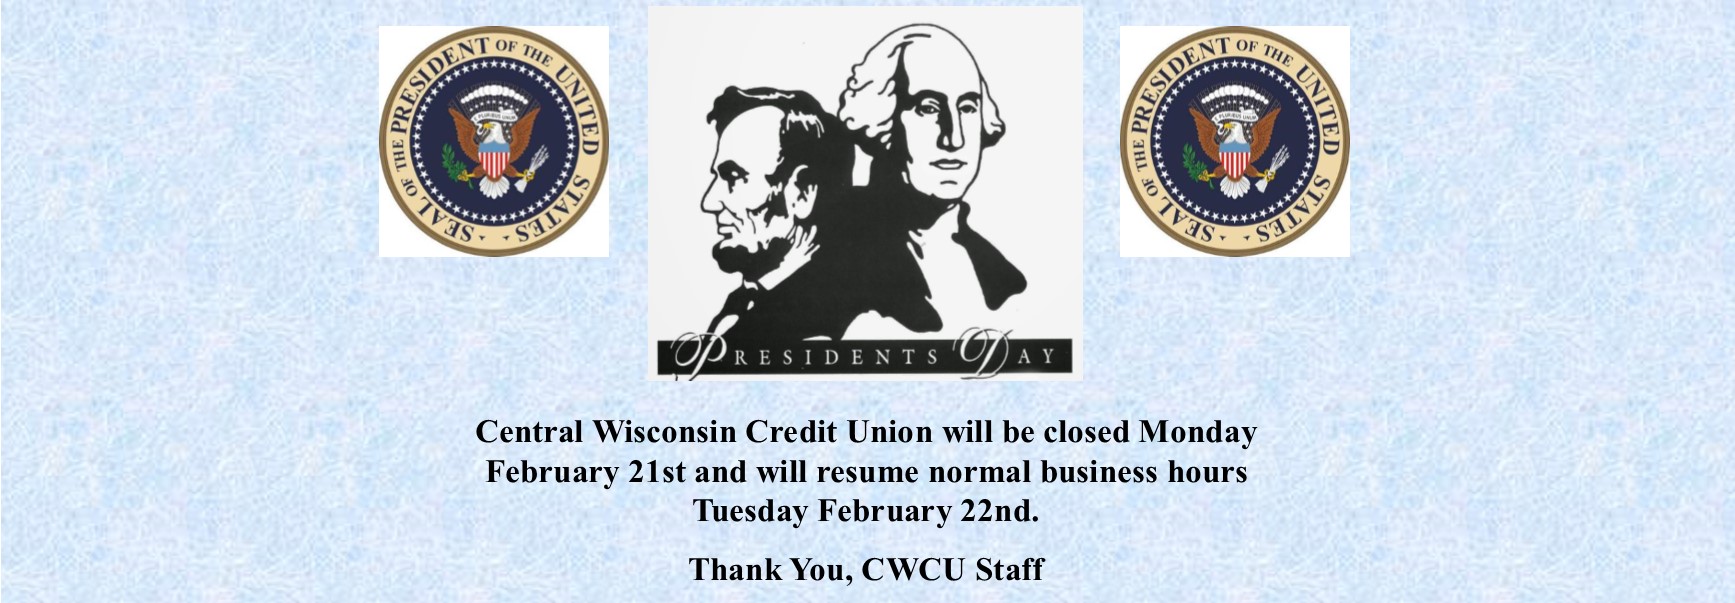 President's Day Closure Message